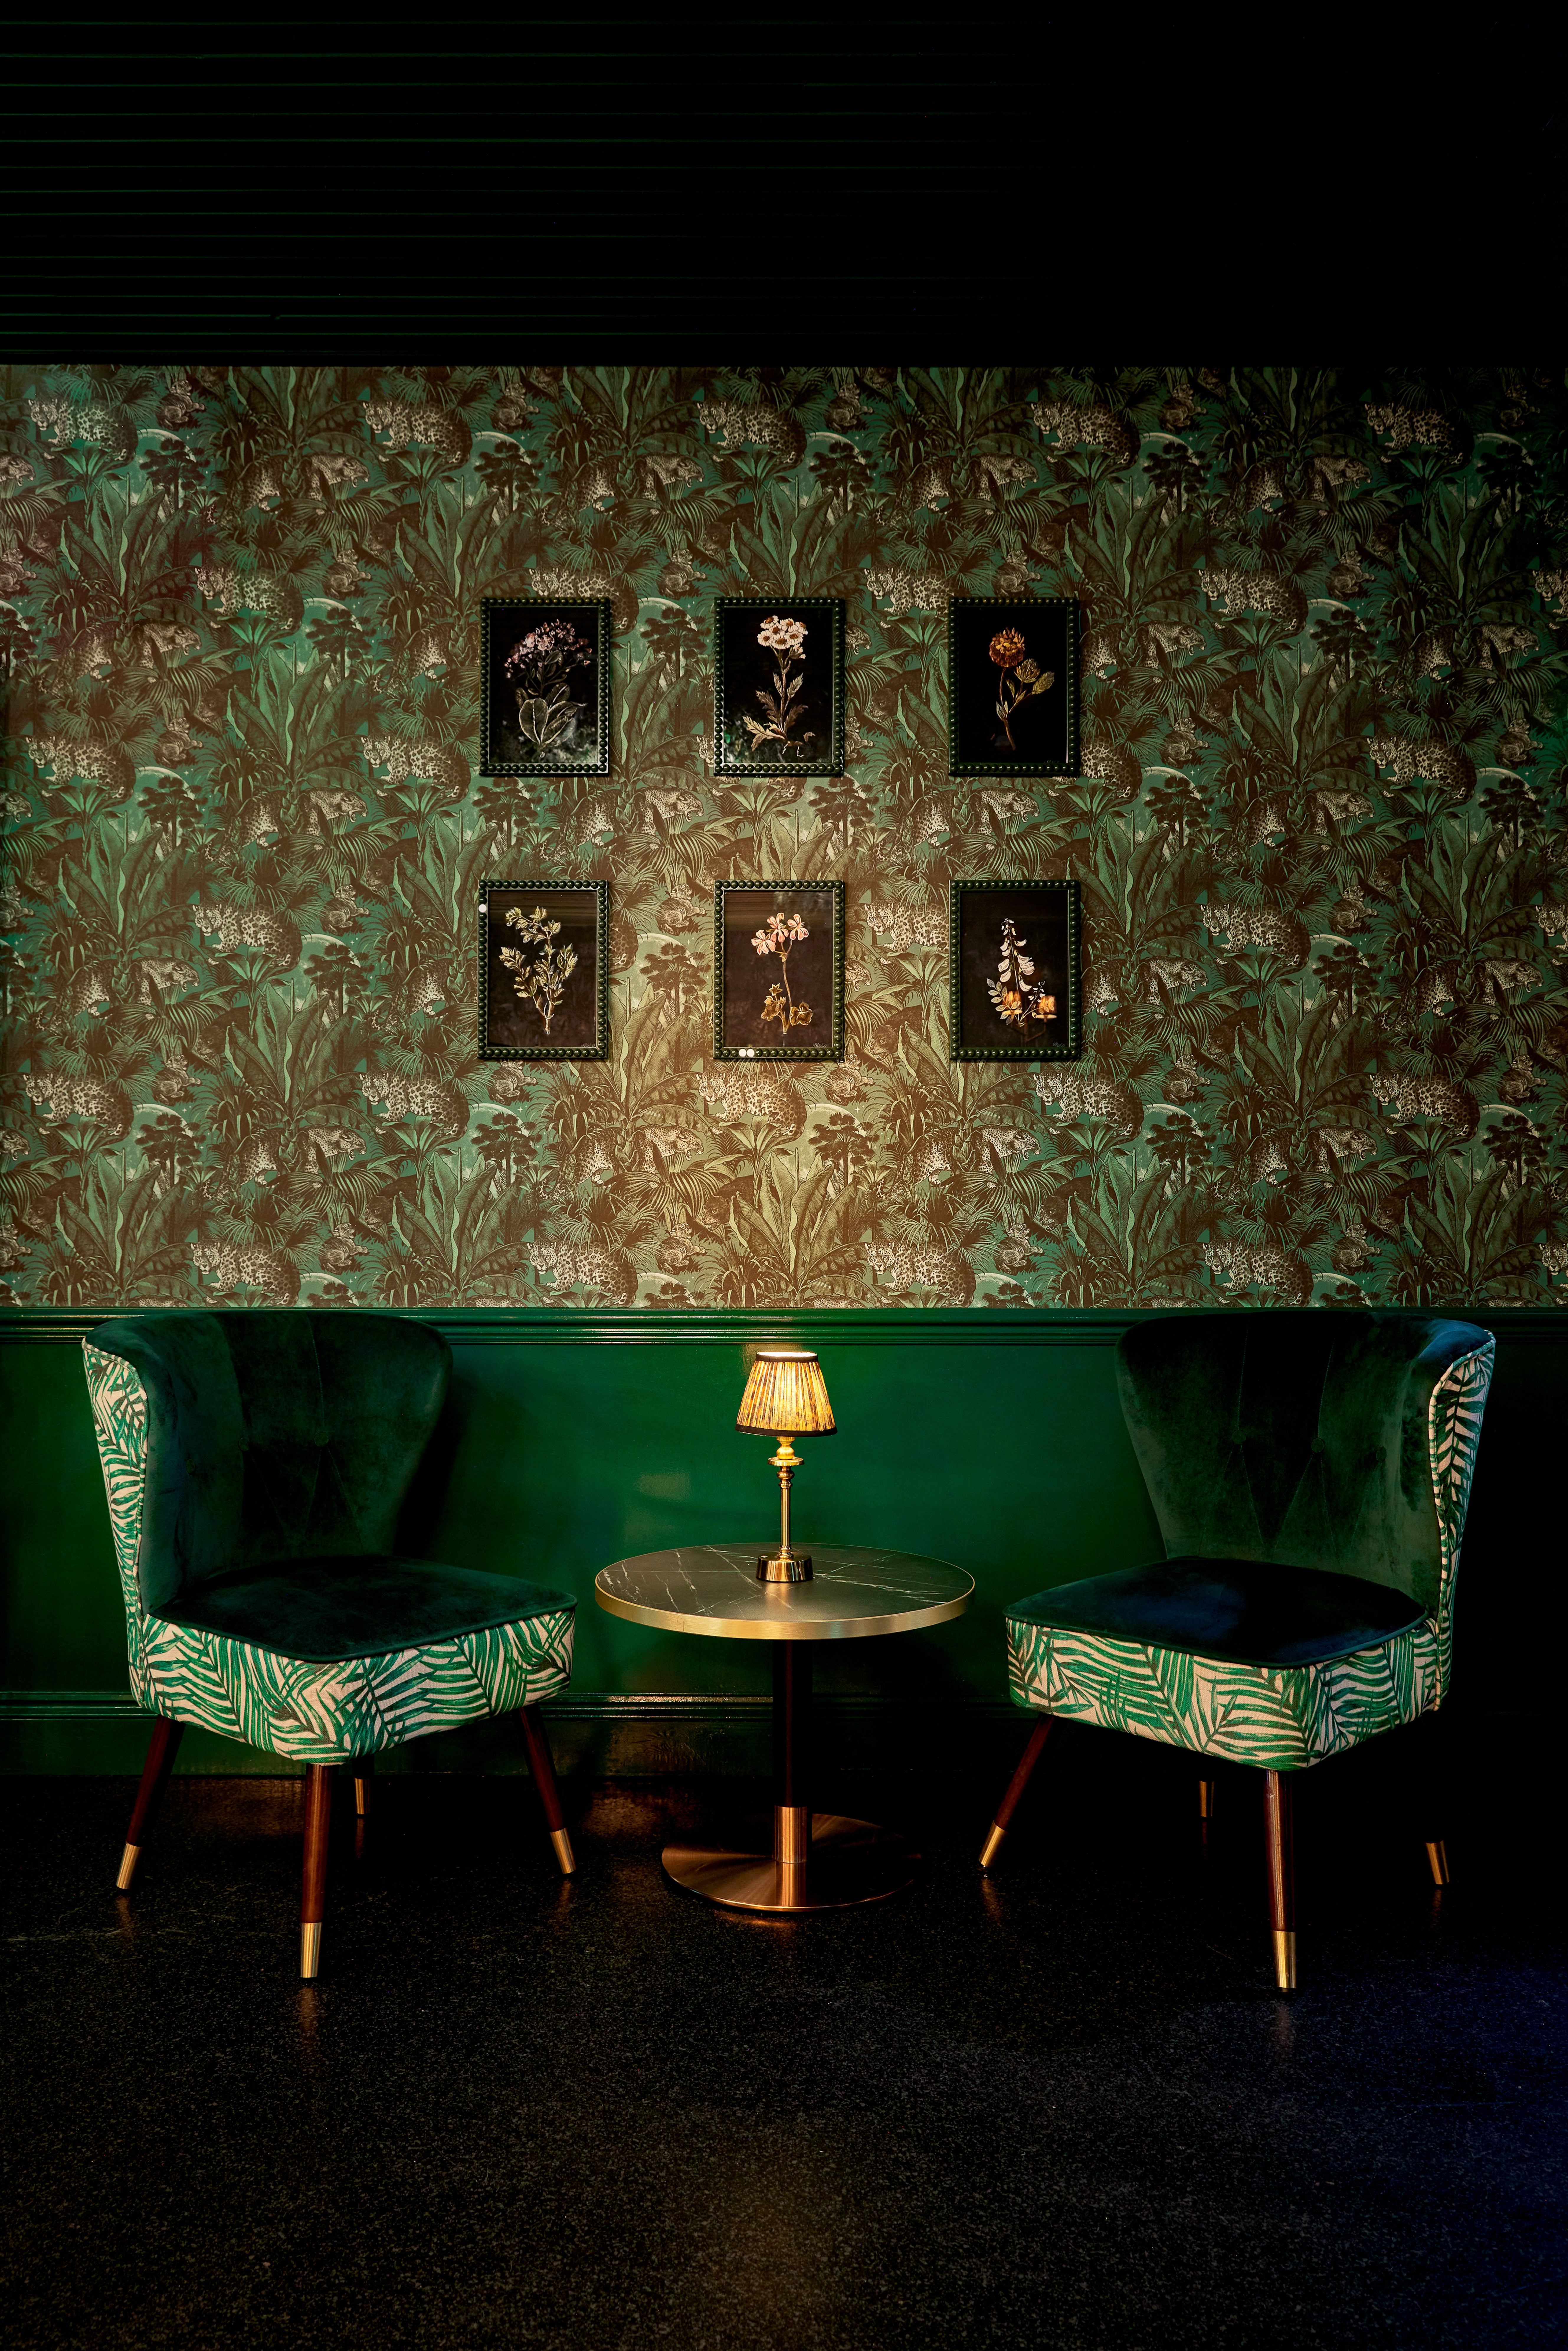 ‘Deep, jewel-toned greens project luxury, glamour and decadence’